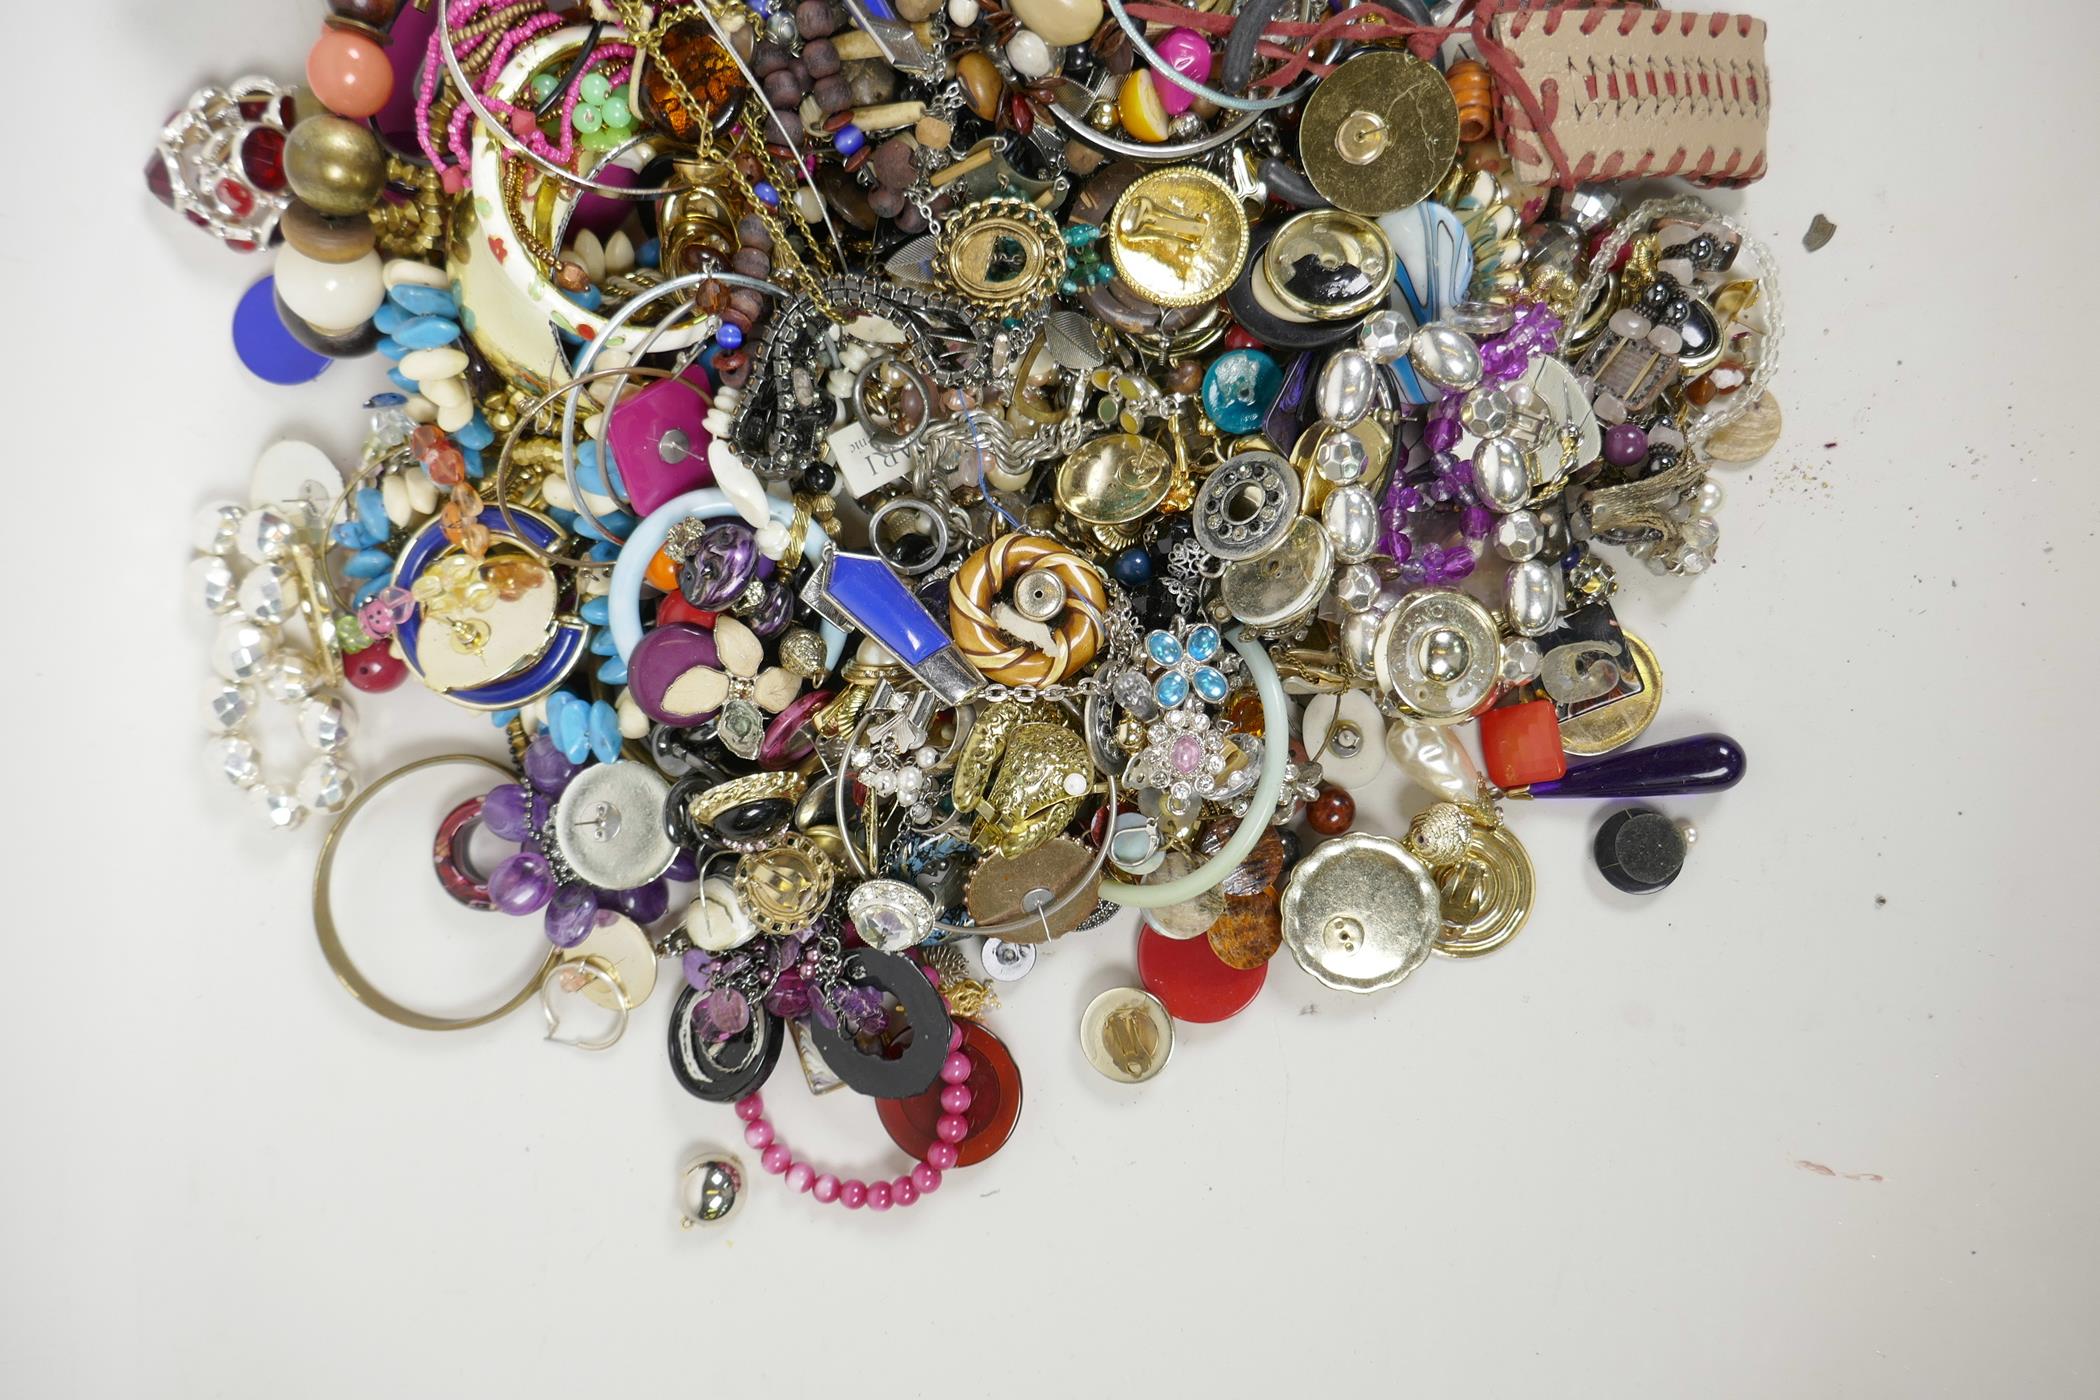 A large quantity of costume jewellery including bangles, necklaces, earrings etc - Image 2 of 4